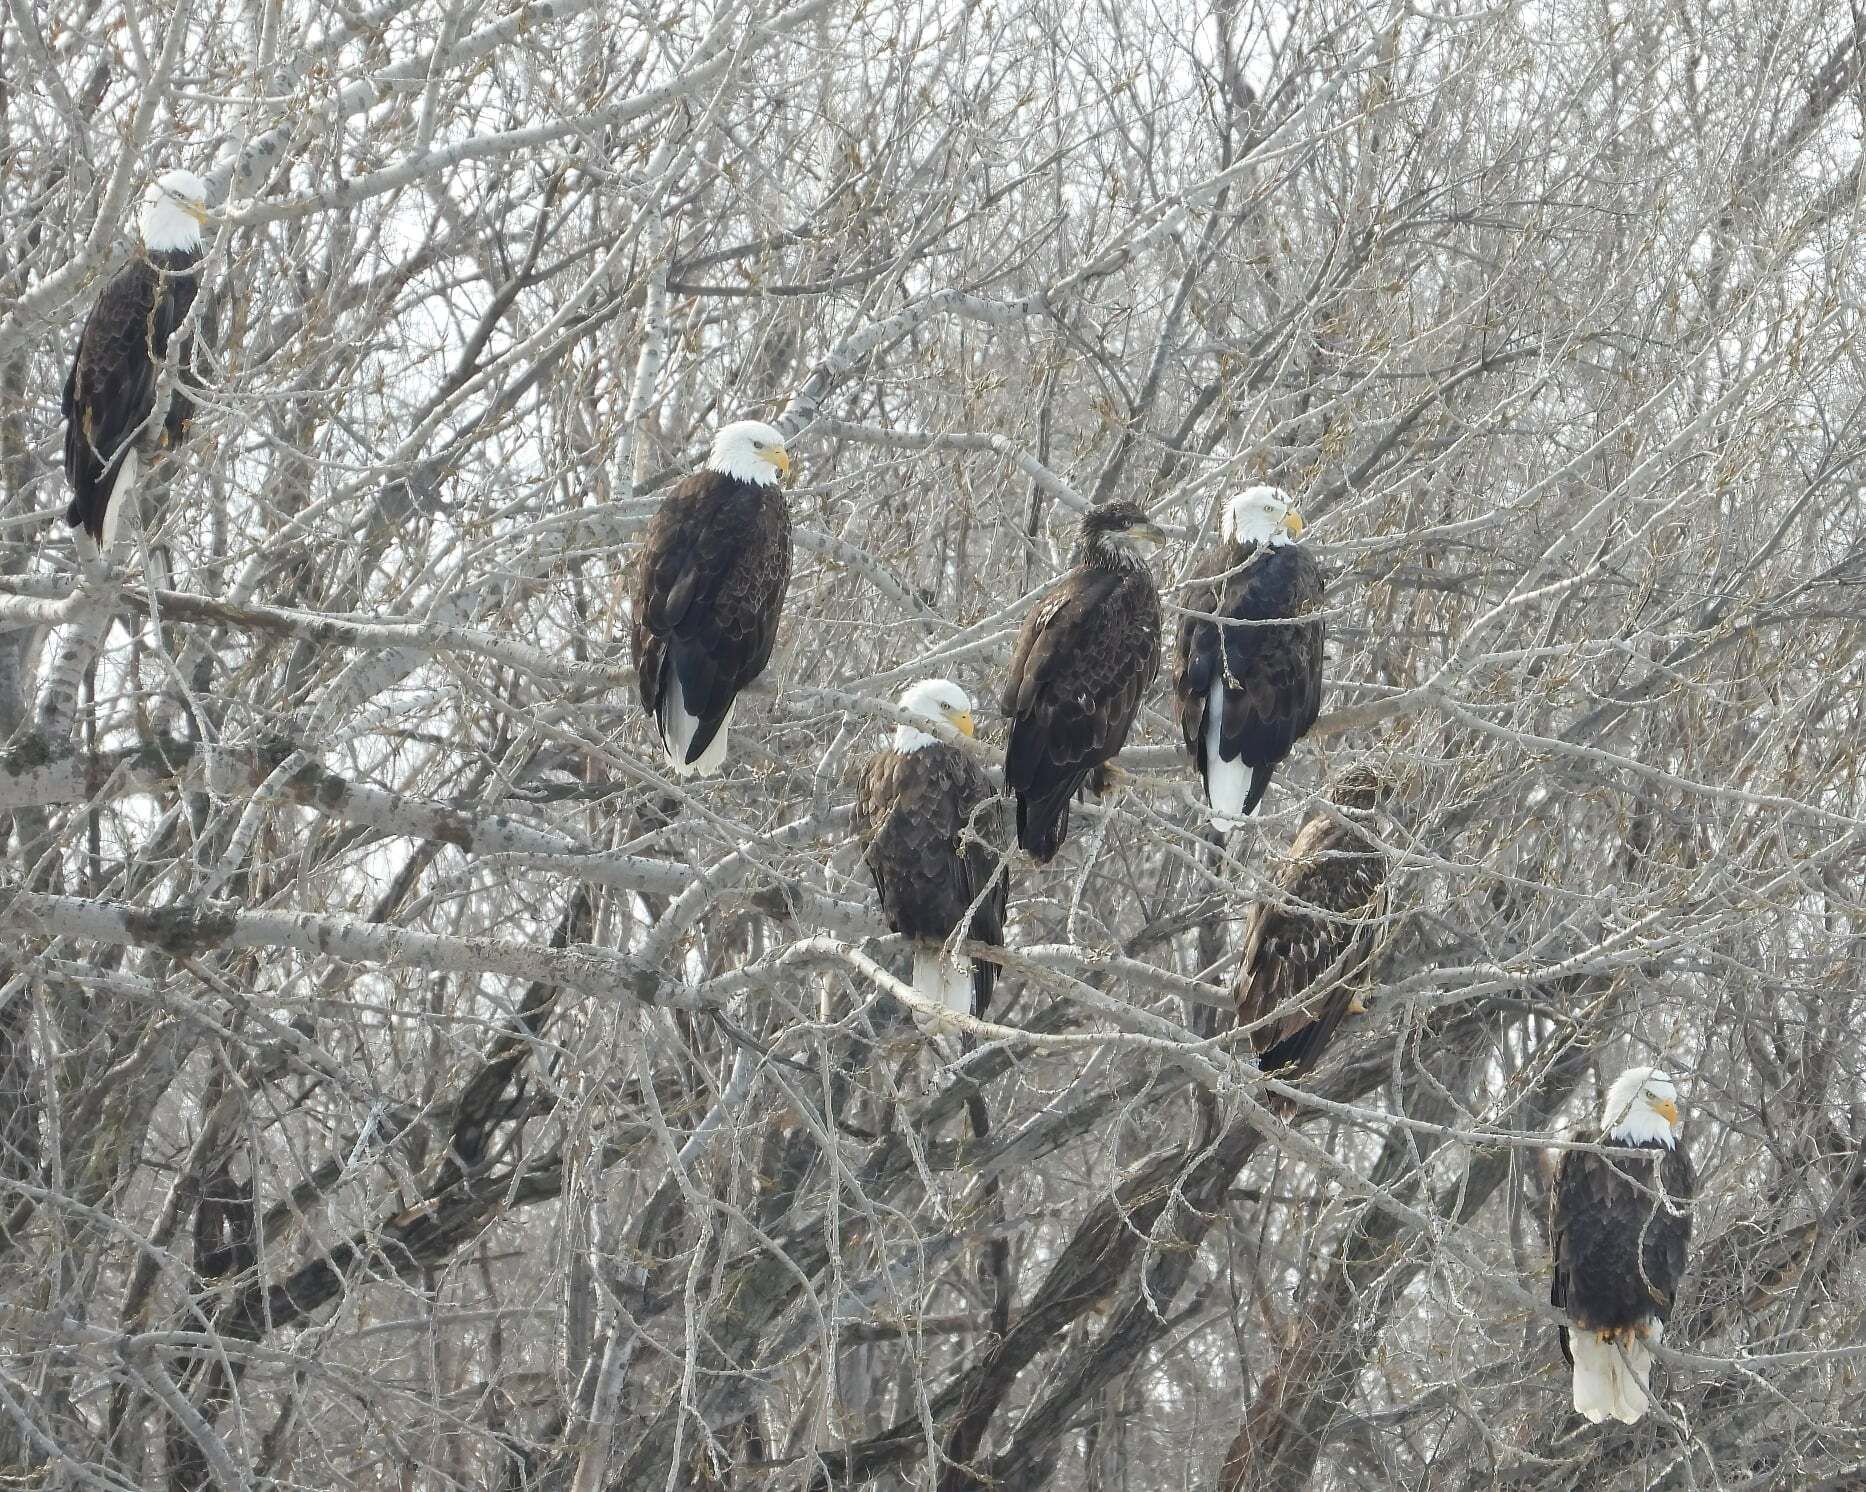 Eagles in downtown Des Moines